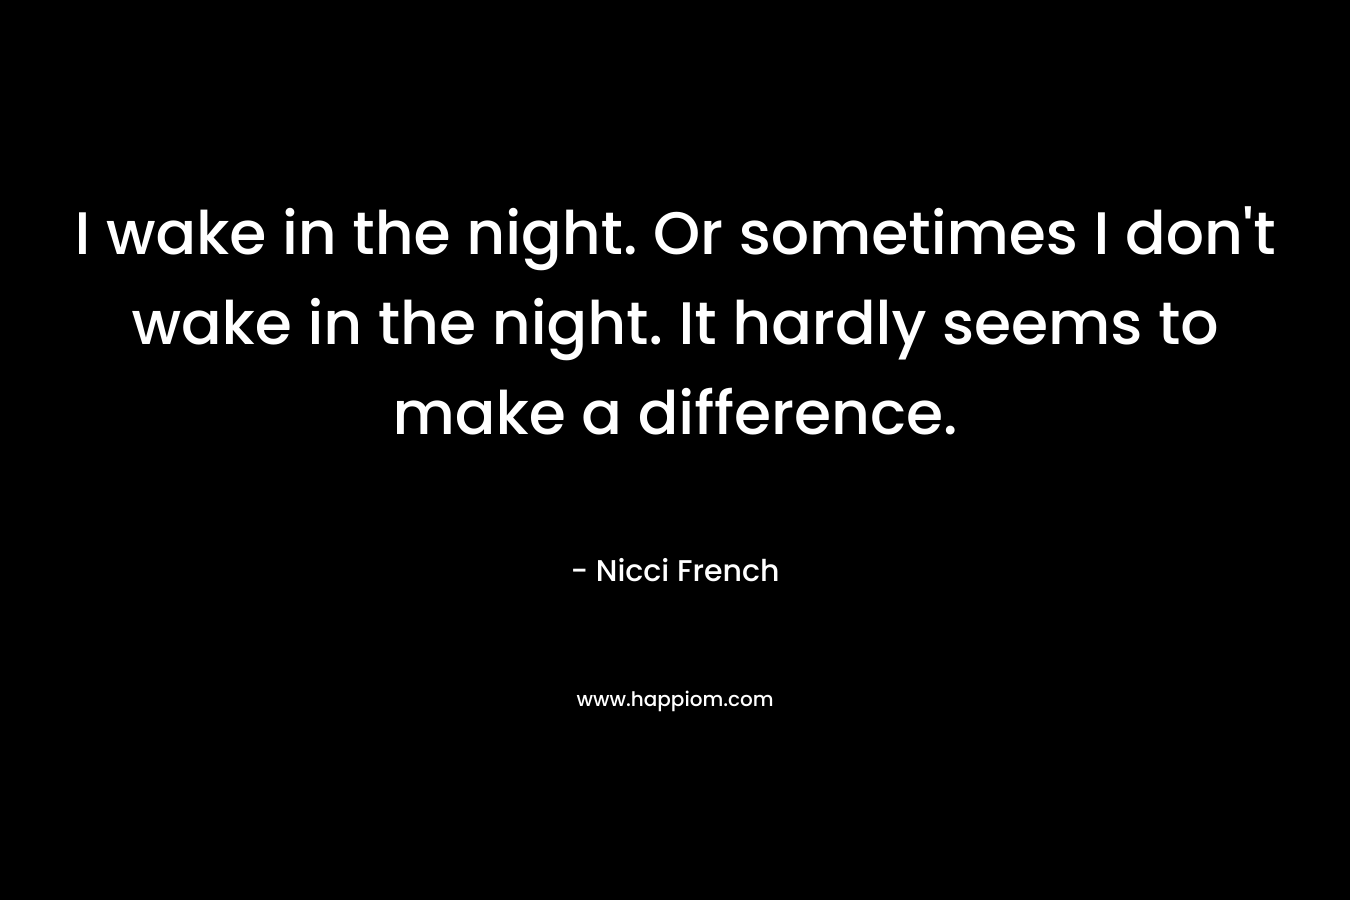 I wake in the night. Or sometimes I don’t wake in the night. It hardly seems to make a difference. – Nicci French